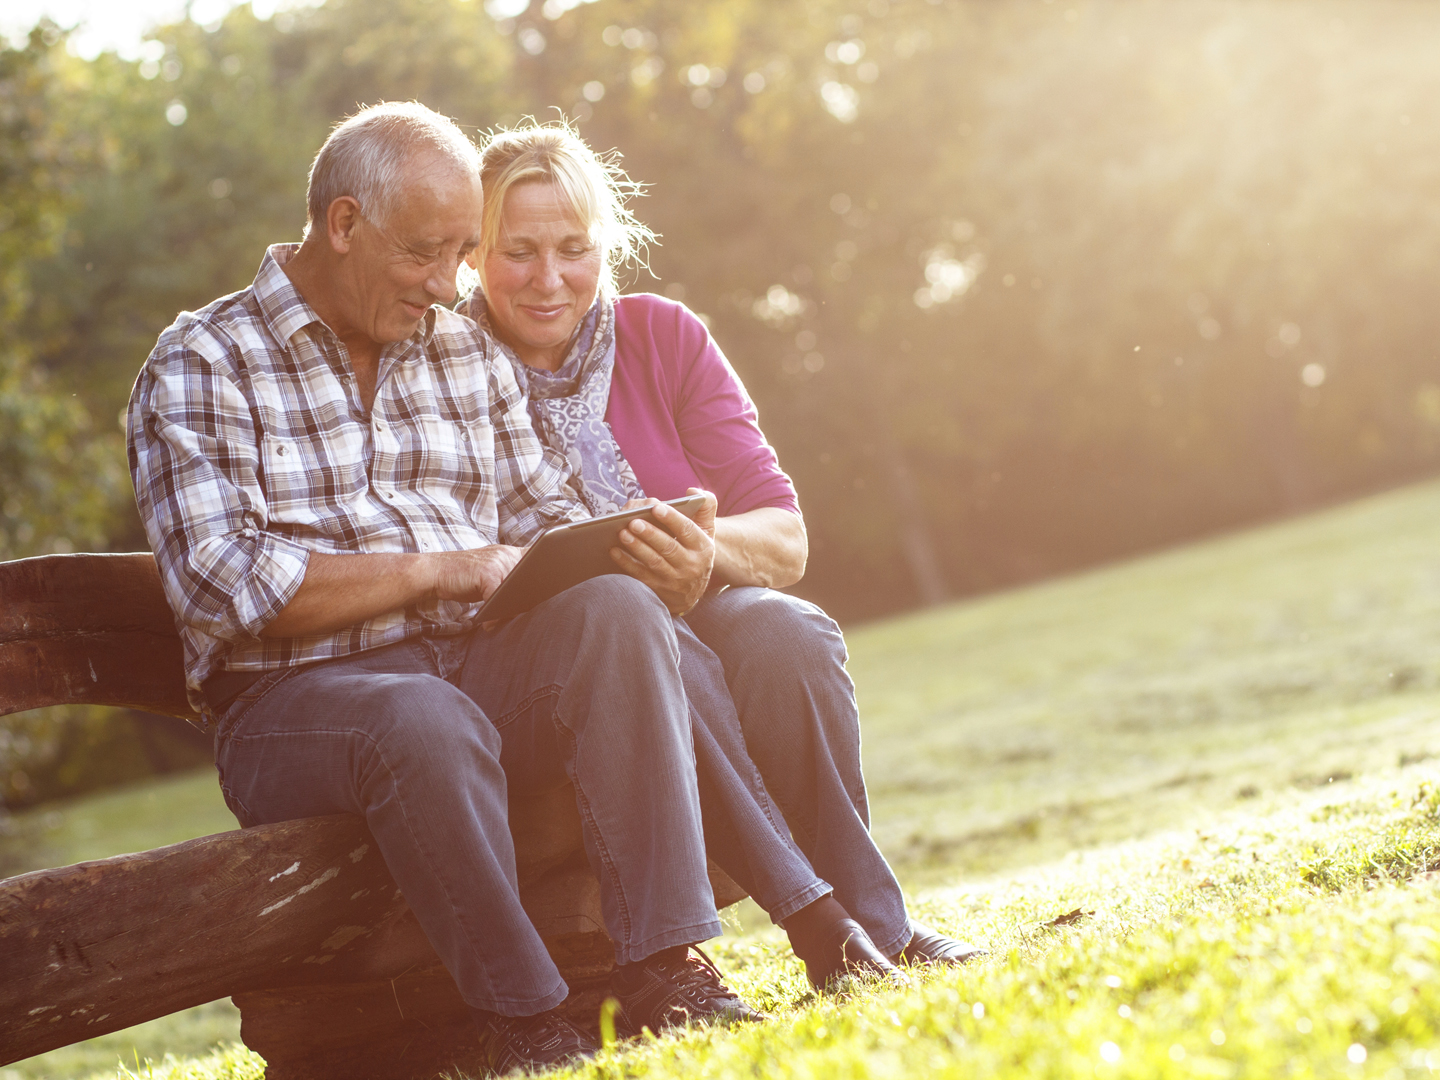 Senior couple sitting on a park bench on sunny autumn day with tablet and relaxing.